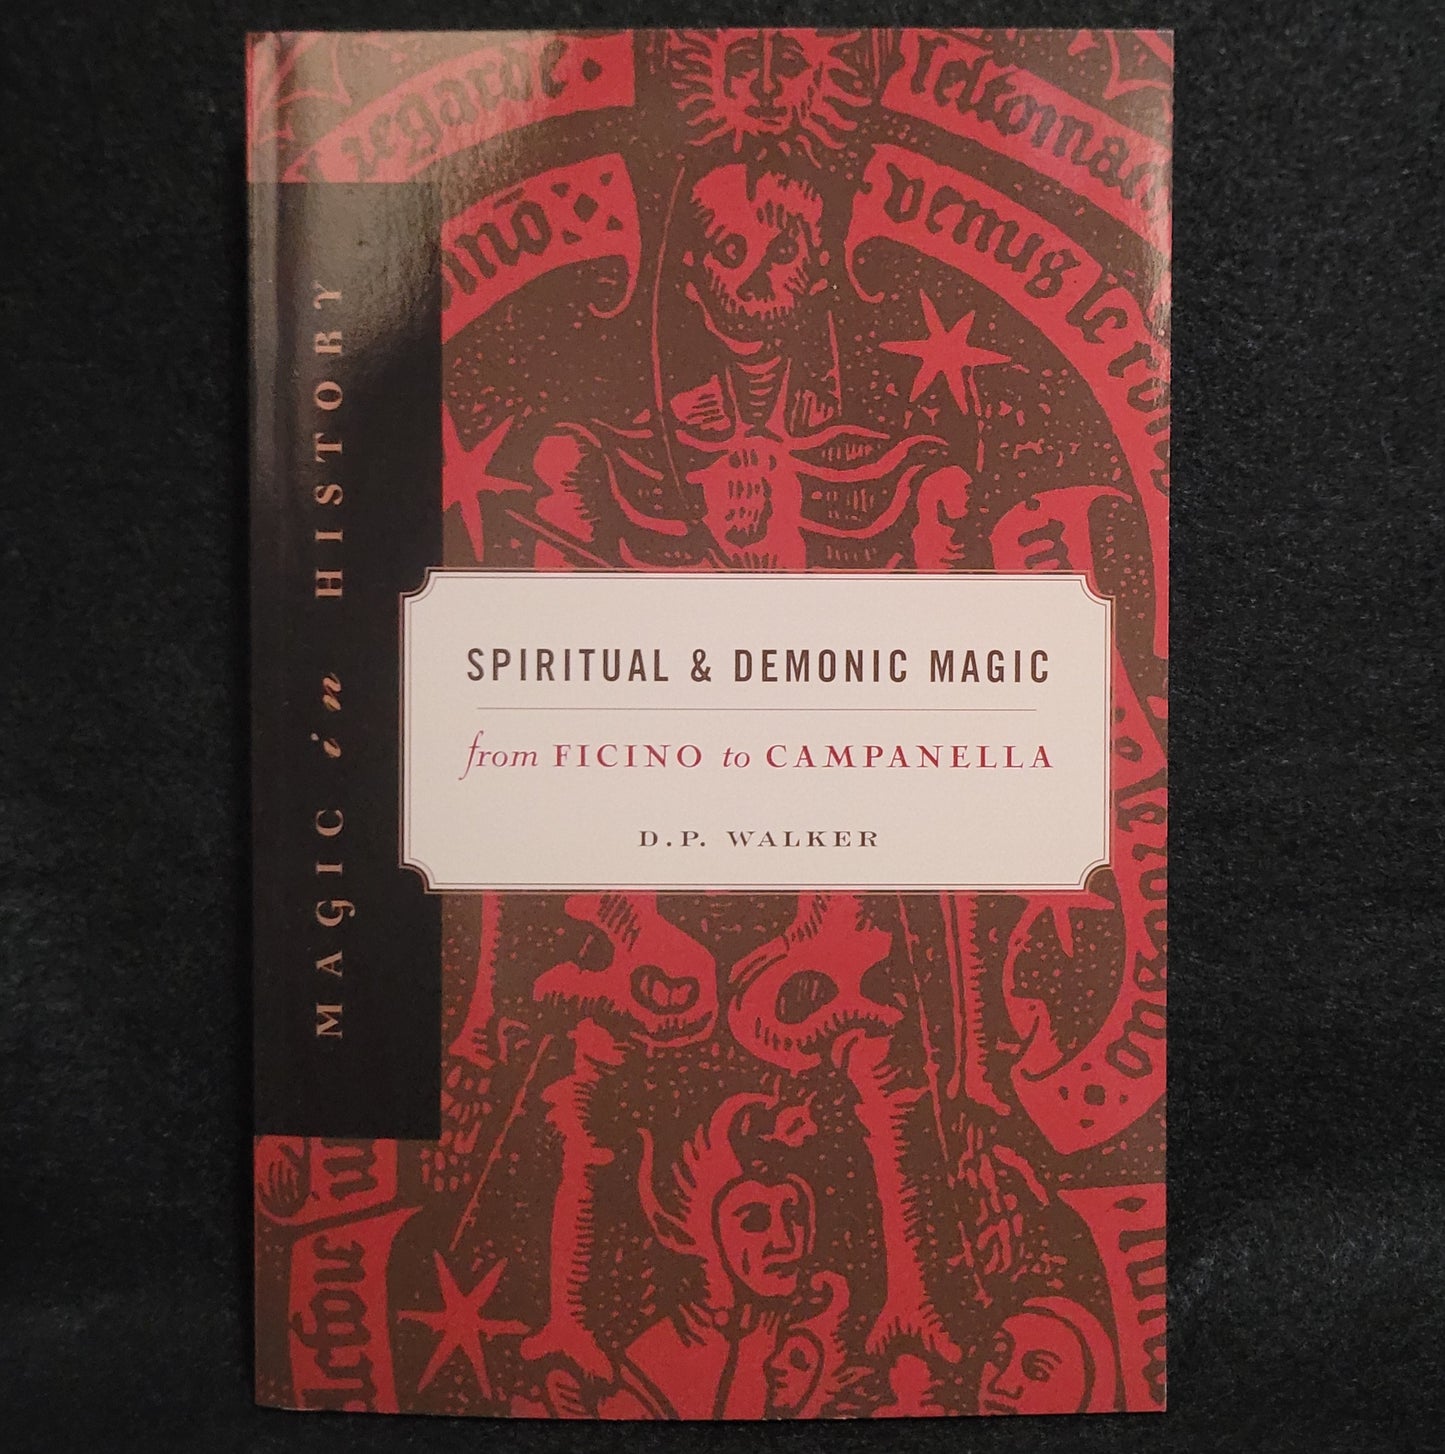 Spiritual and Demonic Magic: from Ficino to Campanella by D.P. Waker (The Pennsylvania State University Press, 2003) Paperback